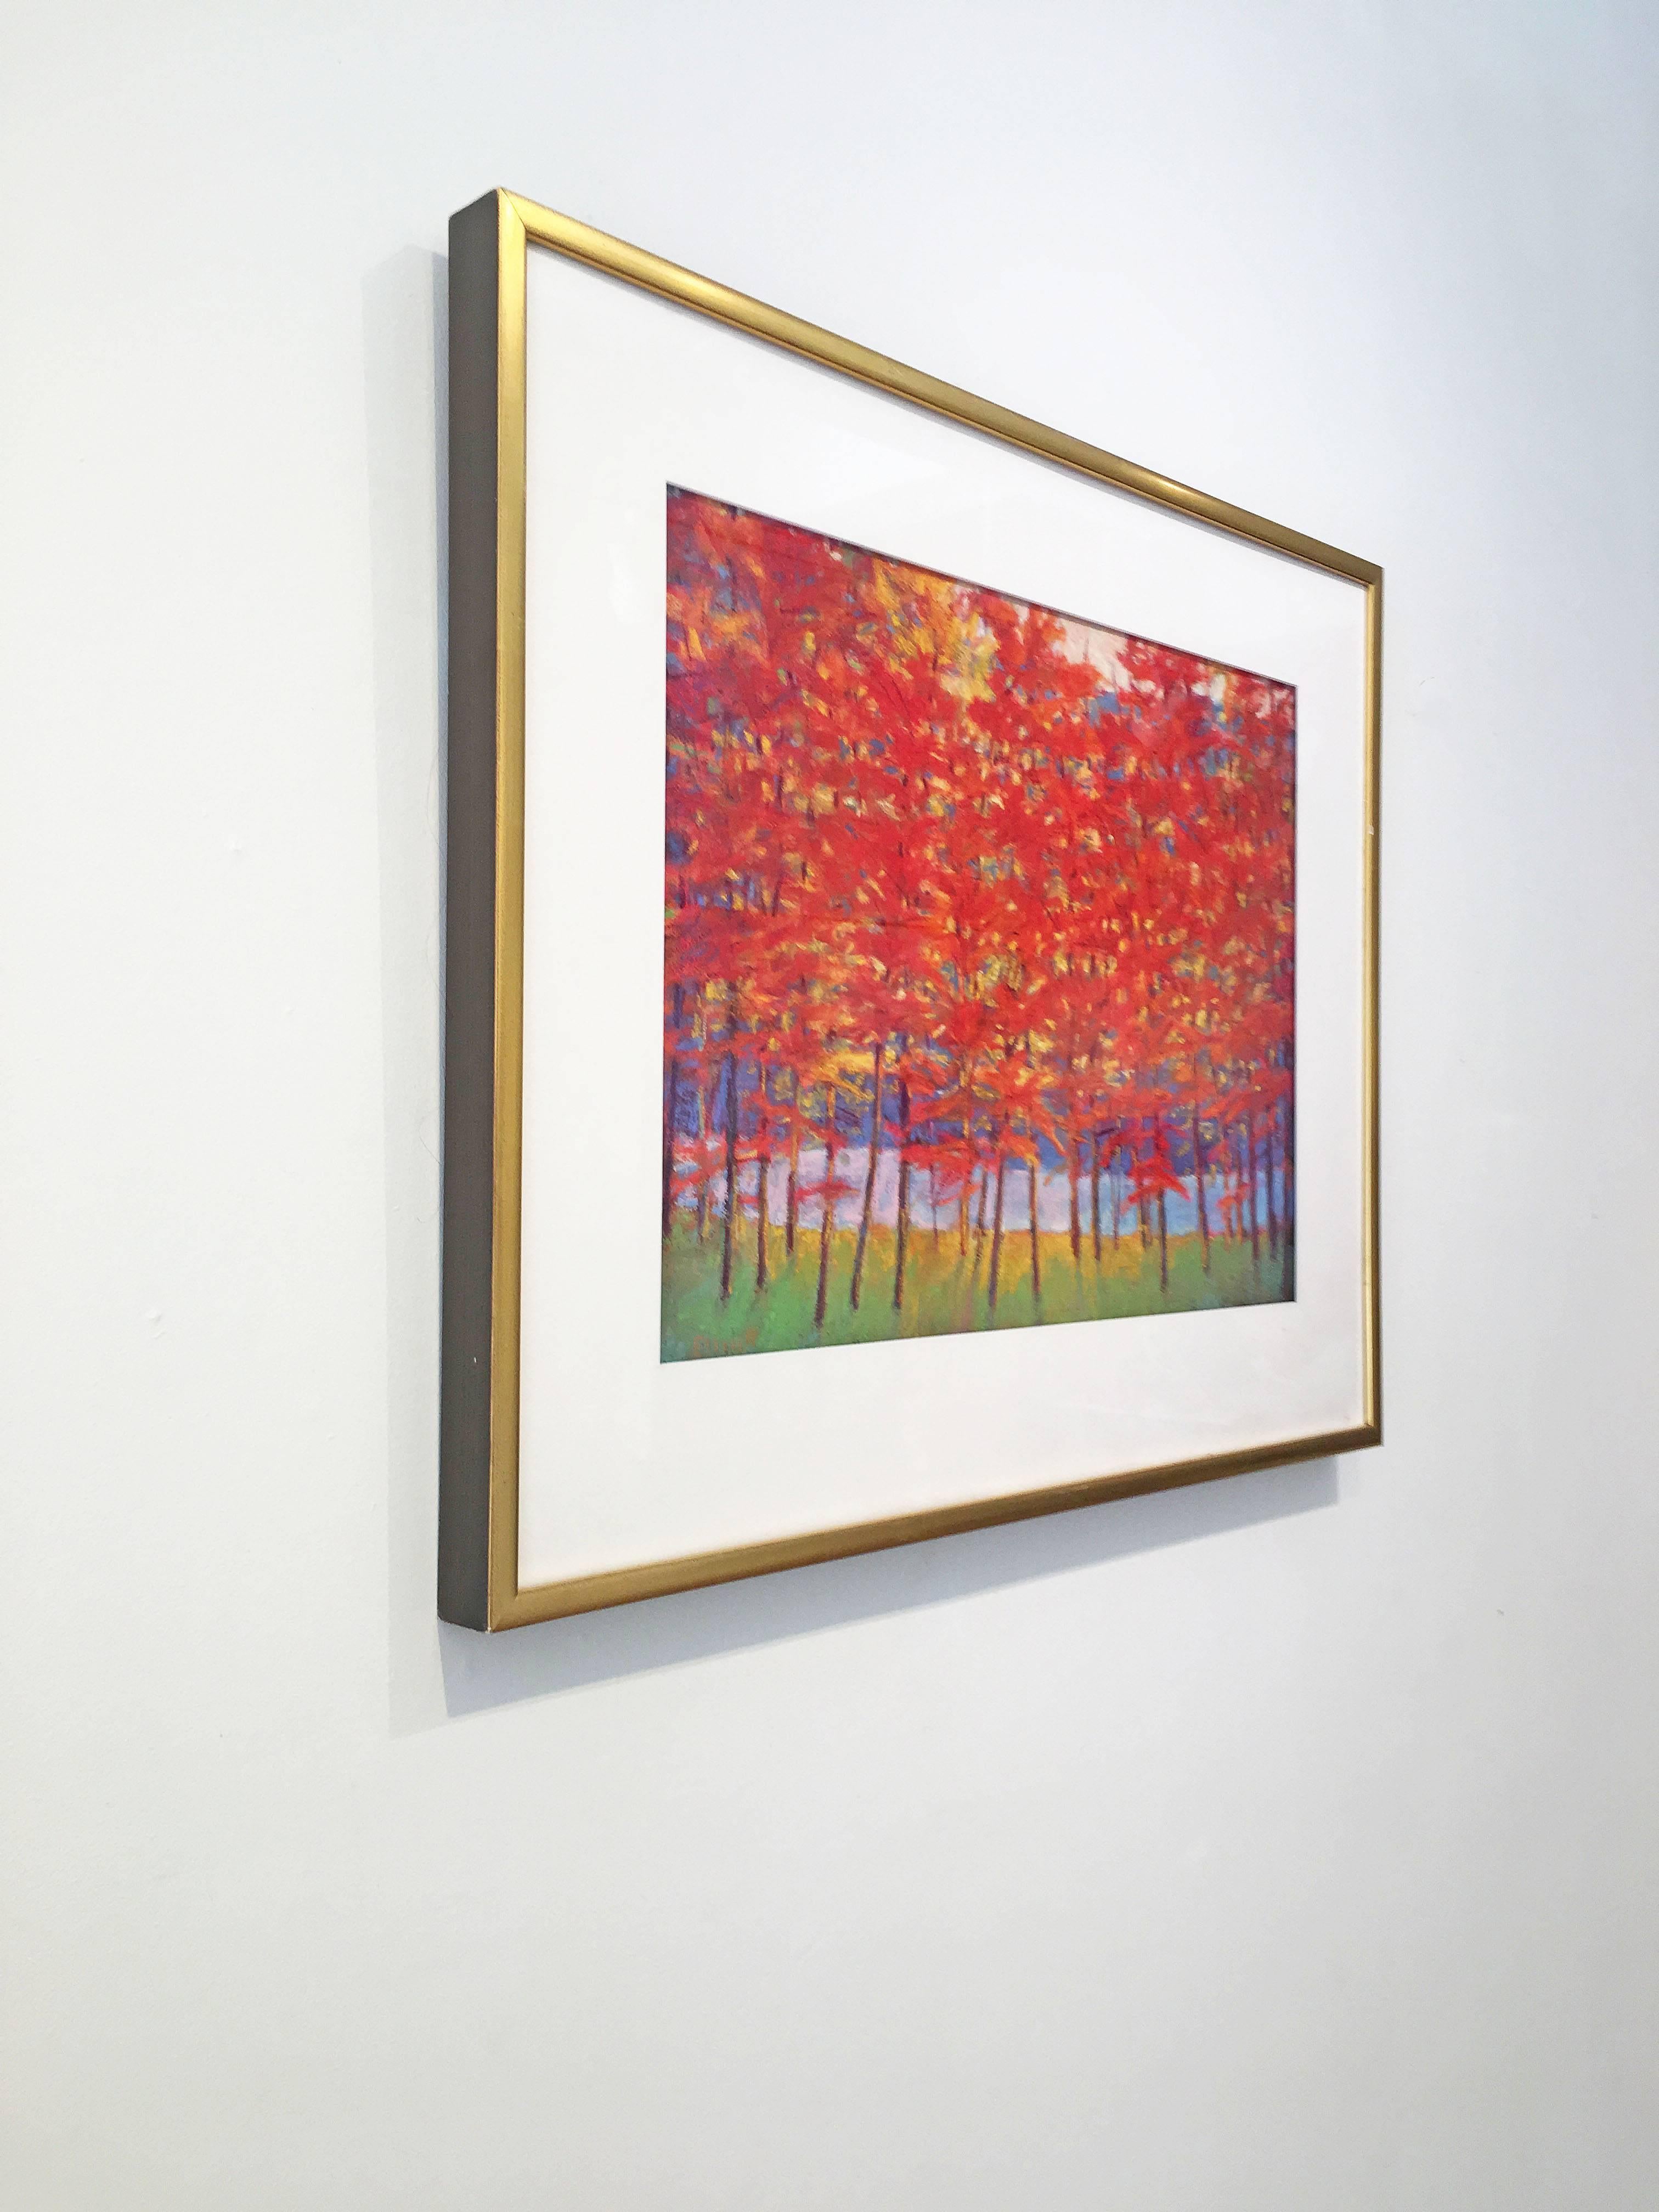 'Red Wall at the Lake,' 2007 by Colorado artist, Ken Elliott. Pastel on archival pigment print, 17 5/8 x 23 3/8 in. This expressionist landscape work features woods by a lake. The lush autumnal forest is beautifully expressed through the usage of